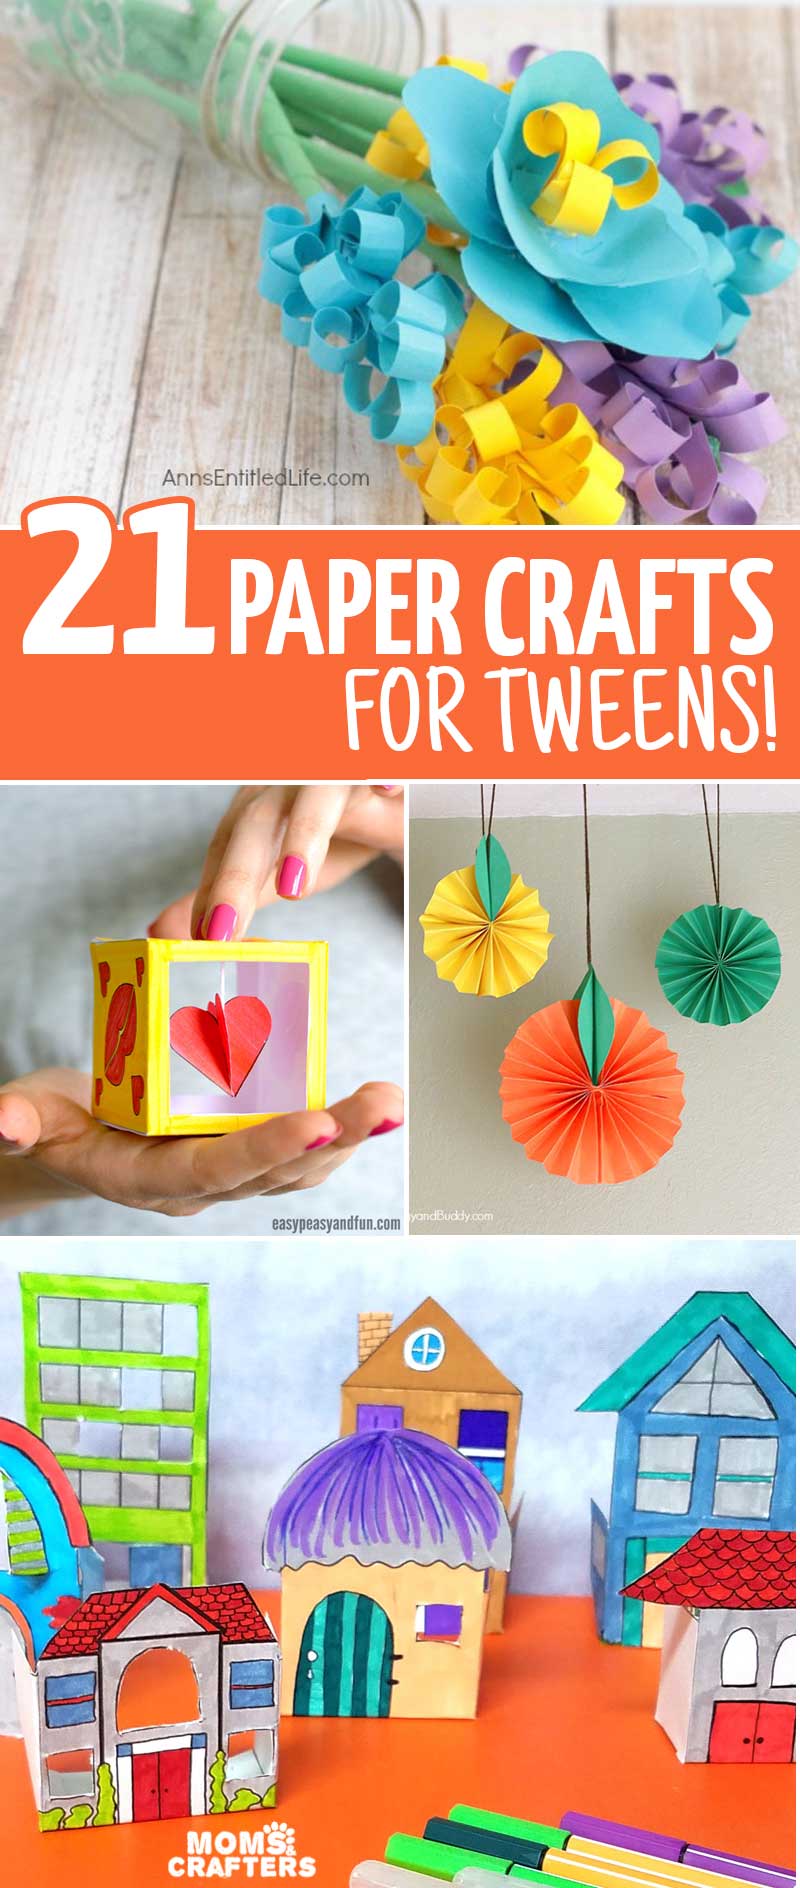 Crafts-For-Kids-Tons-of-Art-and-Craft-Ideas-for-Kids-to-Make